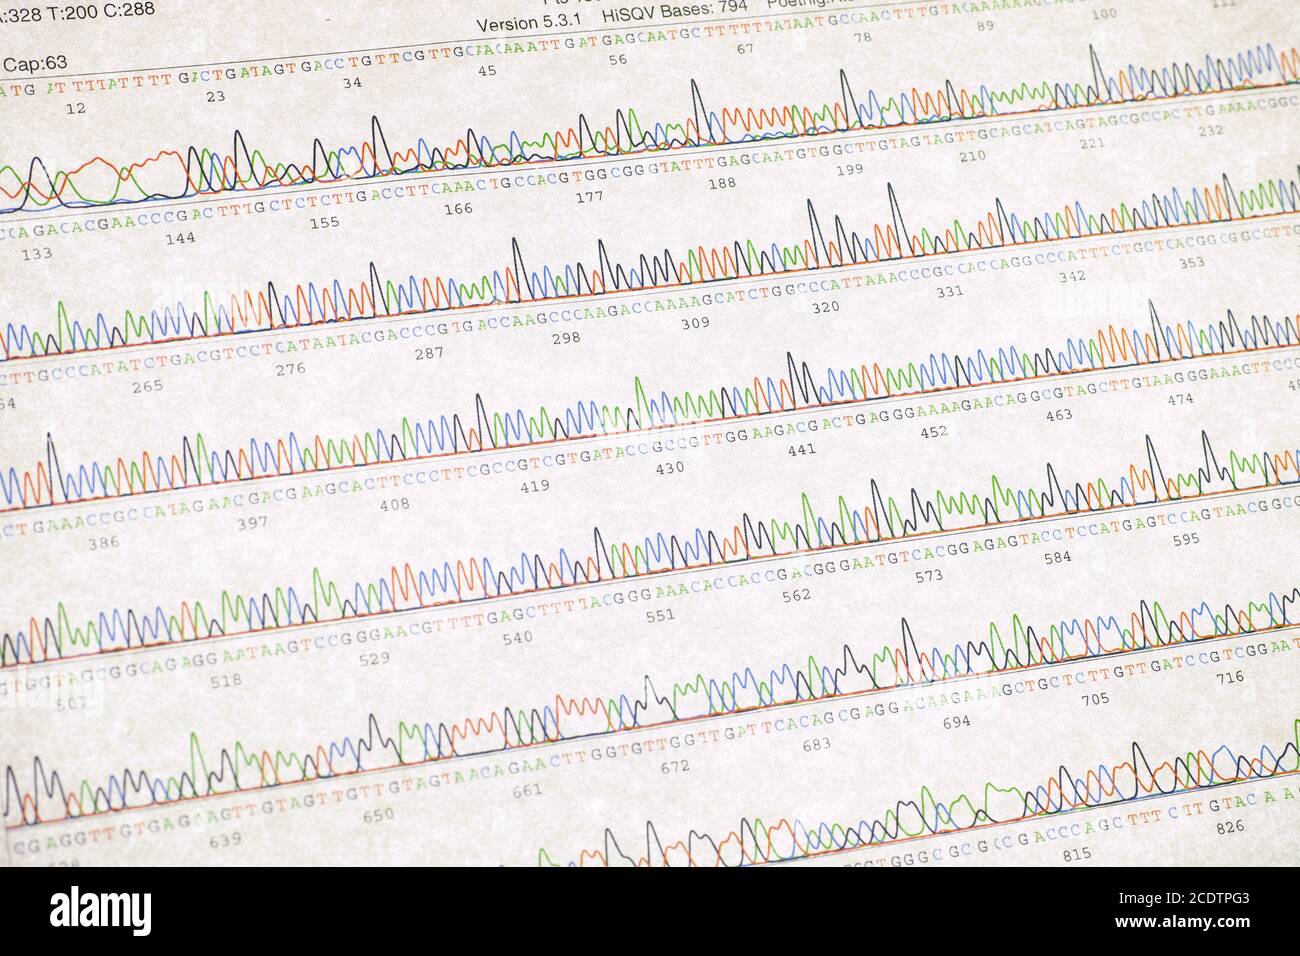 DNA sequencing results print Stock Photo